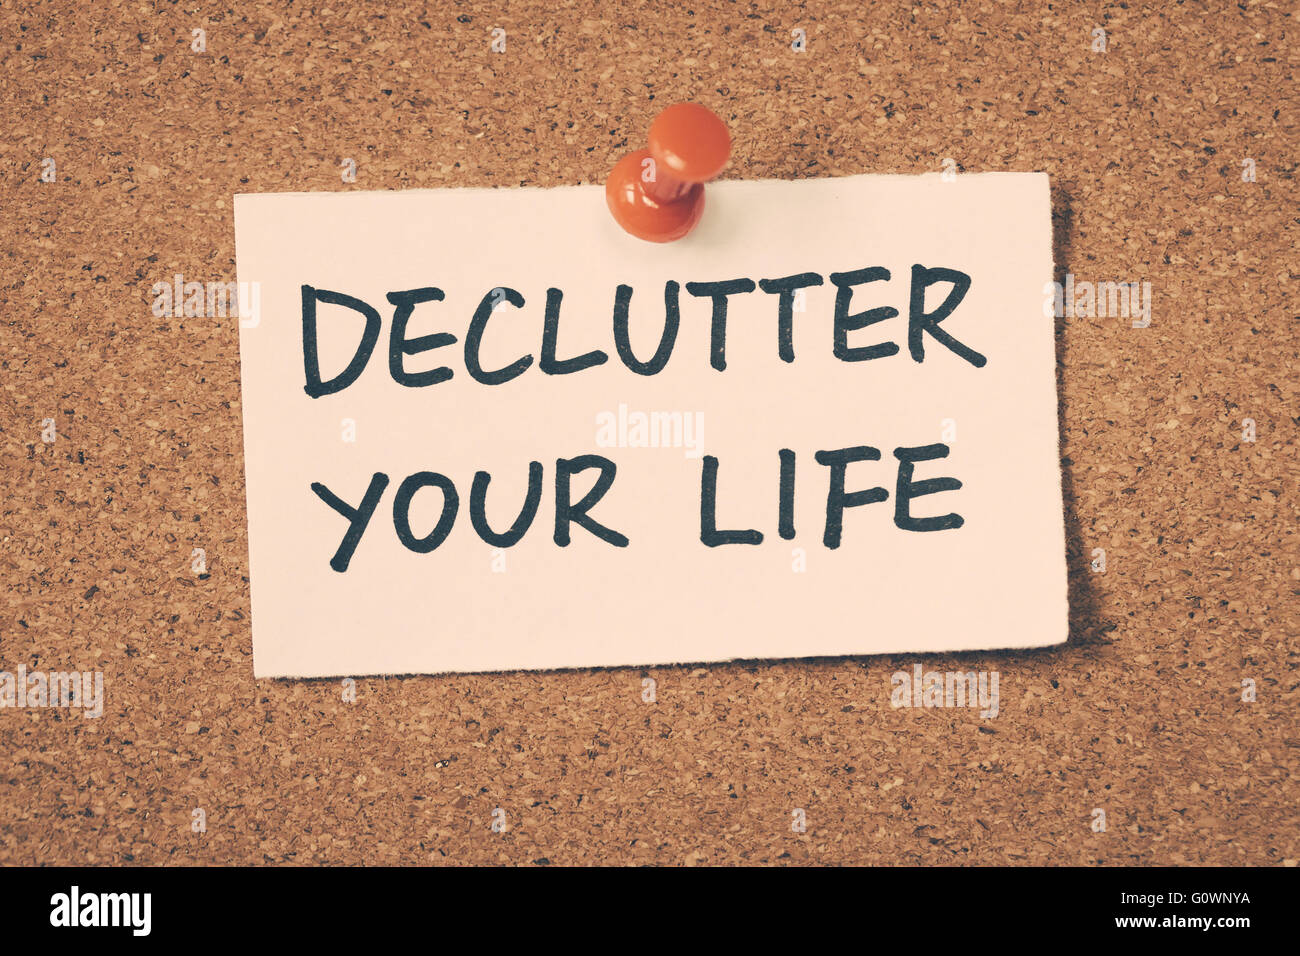 declutter your life Stock Photo